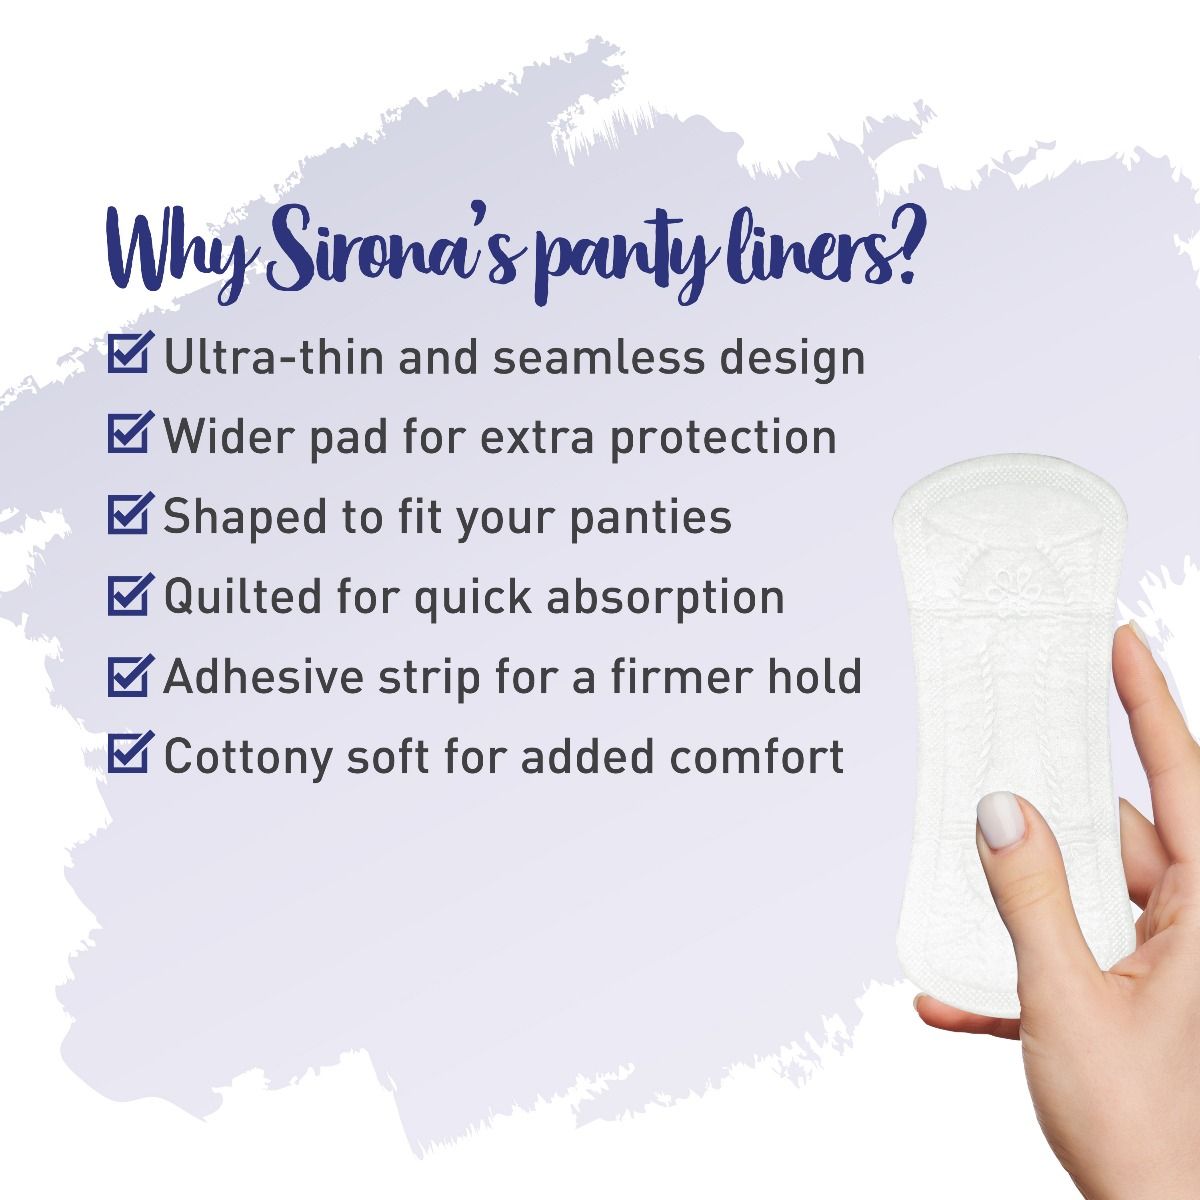 Sirona Dry Comfort Panty Liners Small, 60 Count, Pack of 1 